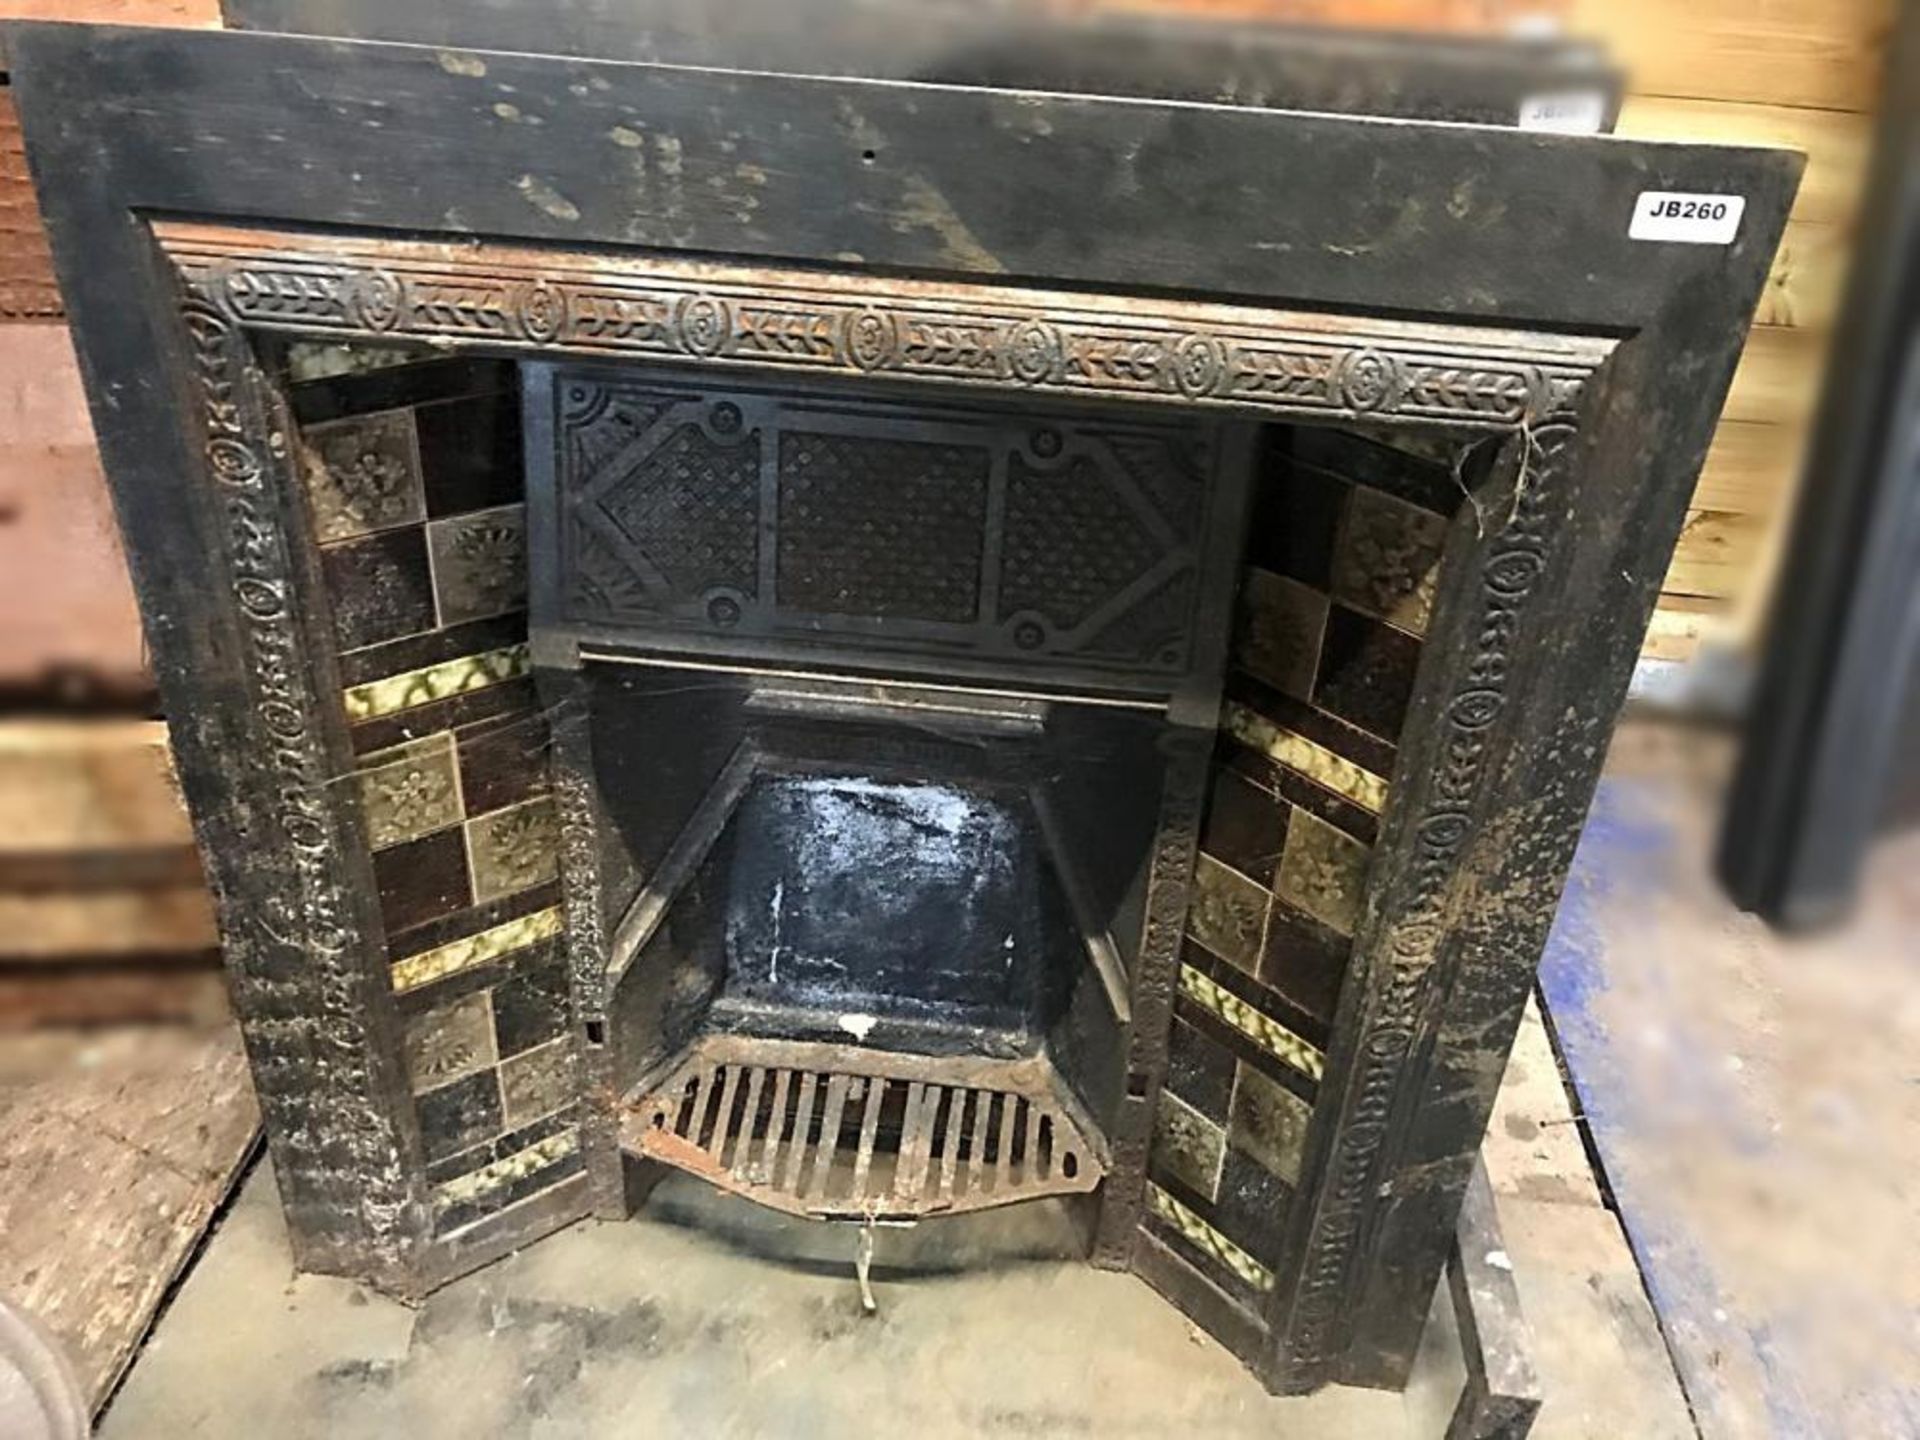 1 x Rare Antique Victorian Cast Iron Fire Insert With Patterned Tiles To Sides - Dimensions: Width